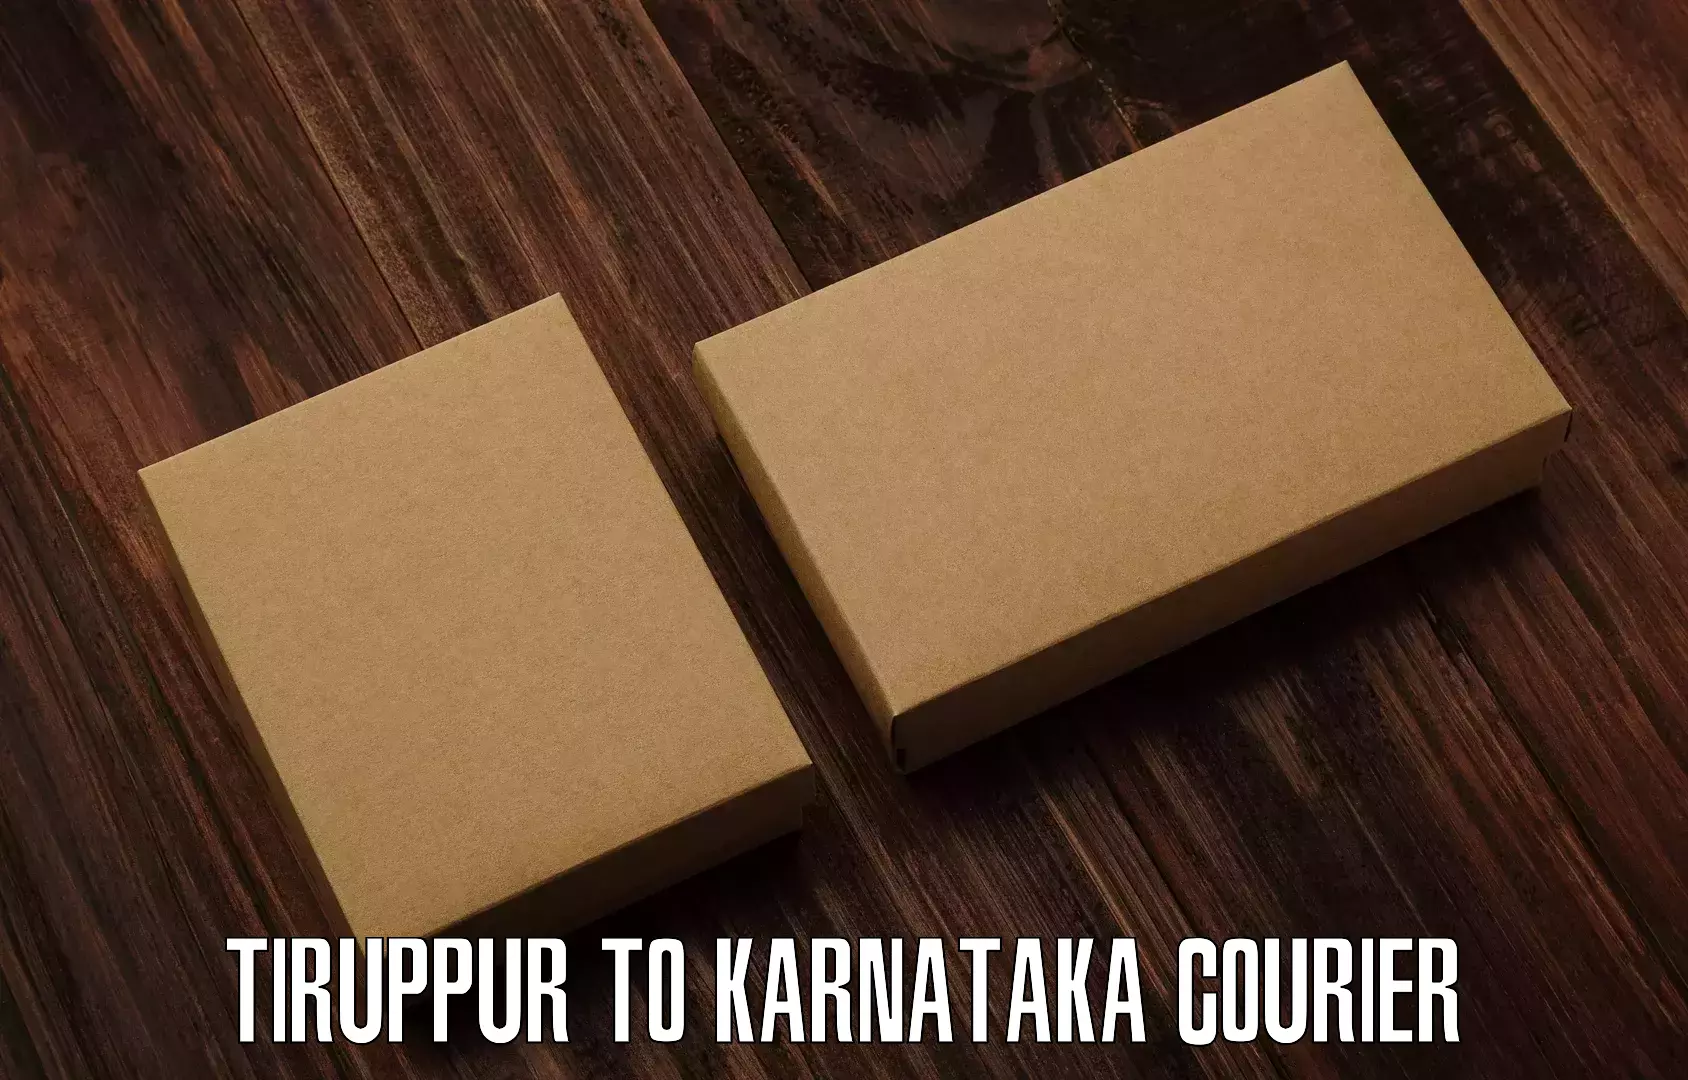 On-demand delivery in Tiruppur to Karnataka